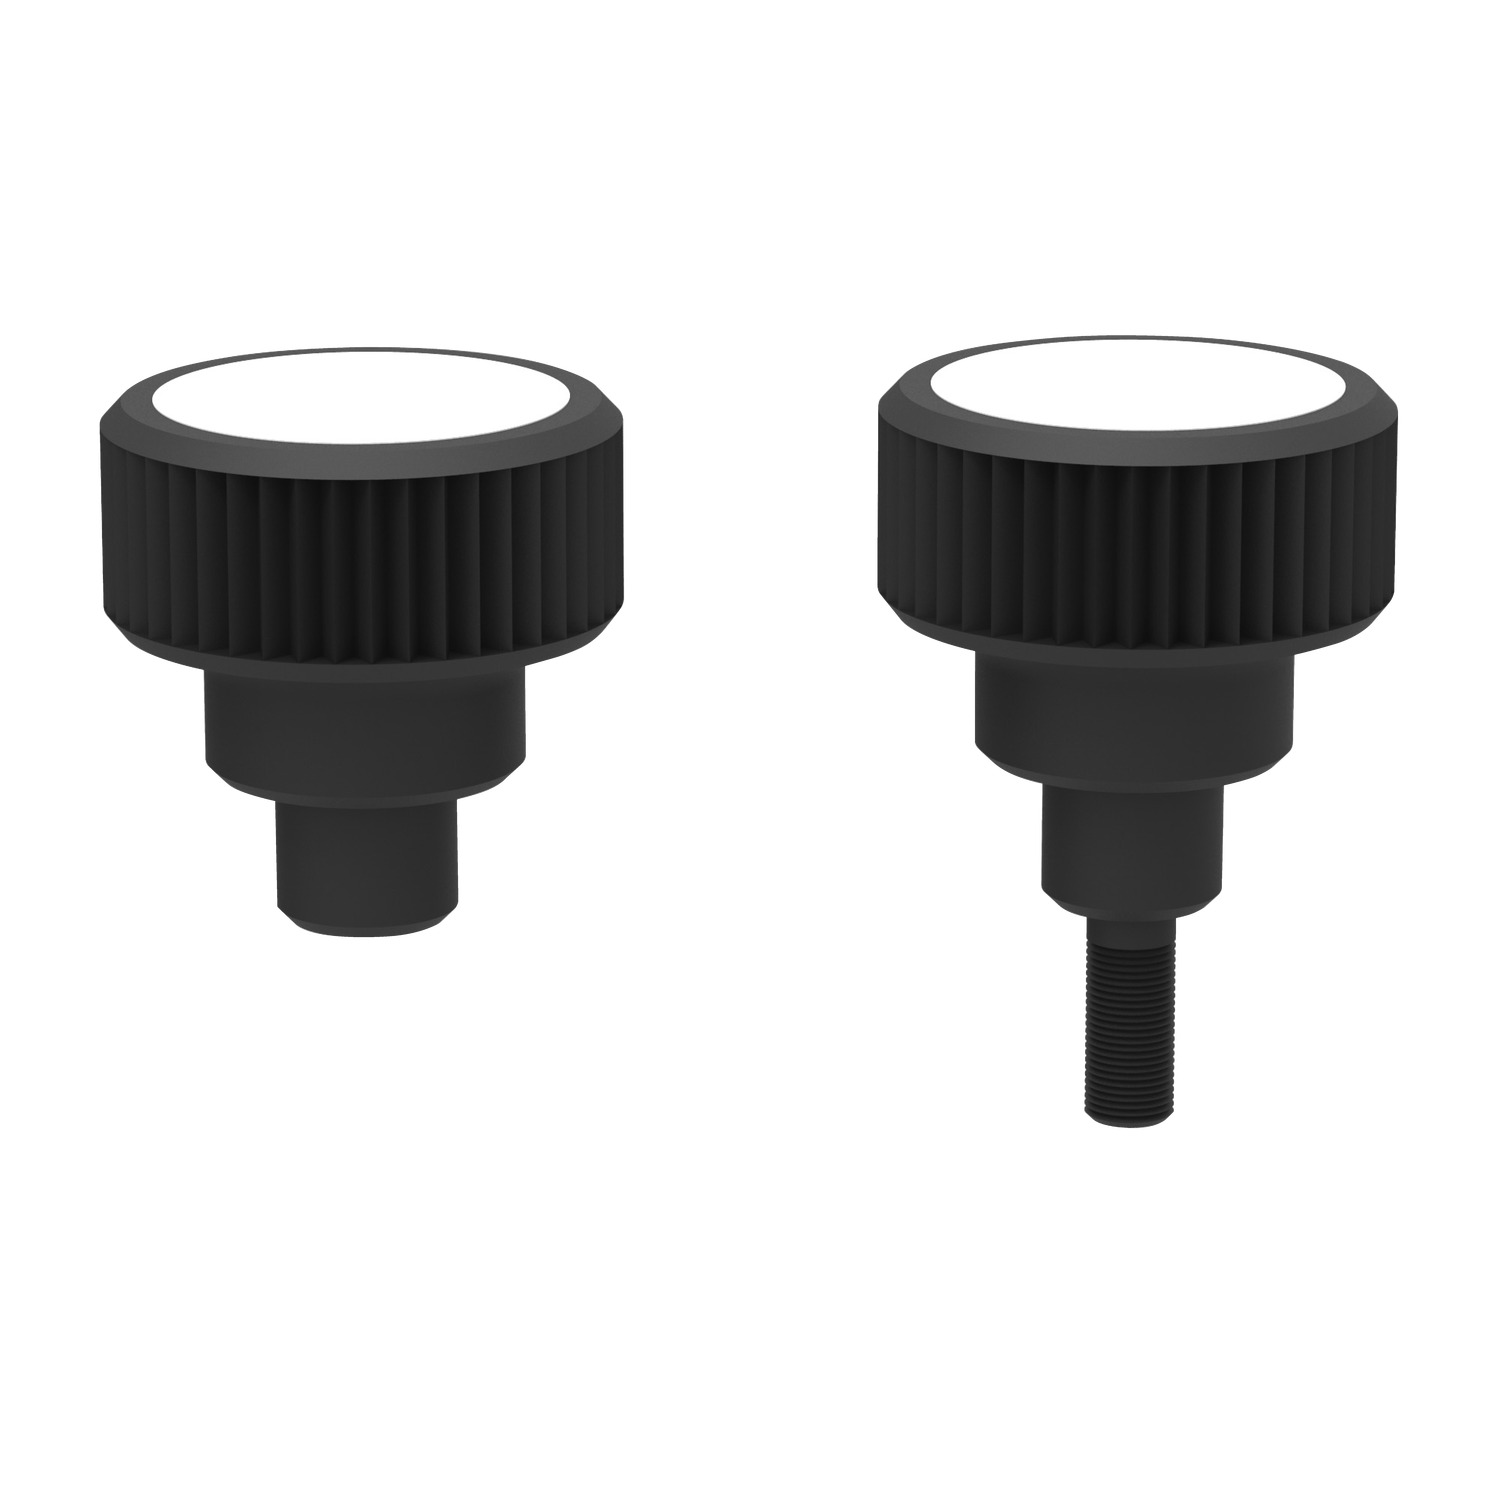 Torque Control Knob Features an intergrated torque mechanism with a defined torque during tightening. Reaching the torque value results in with prevent further tightening and possible damage.